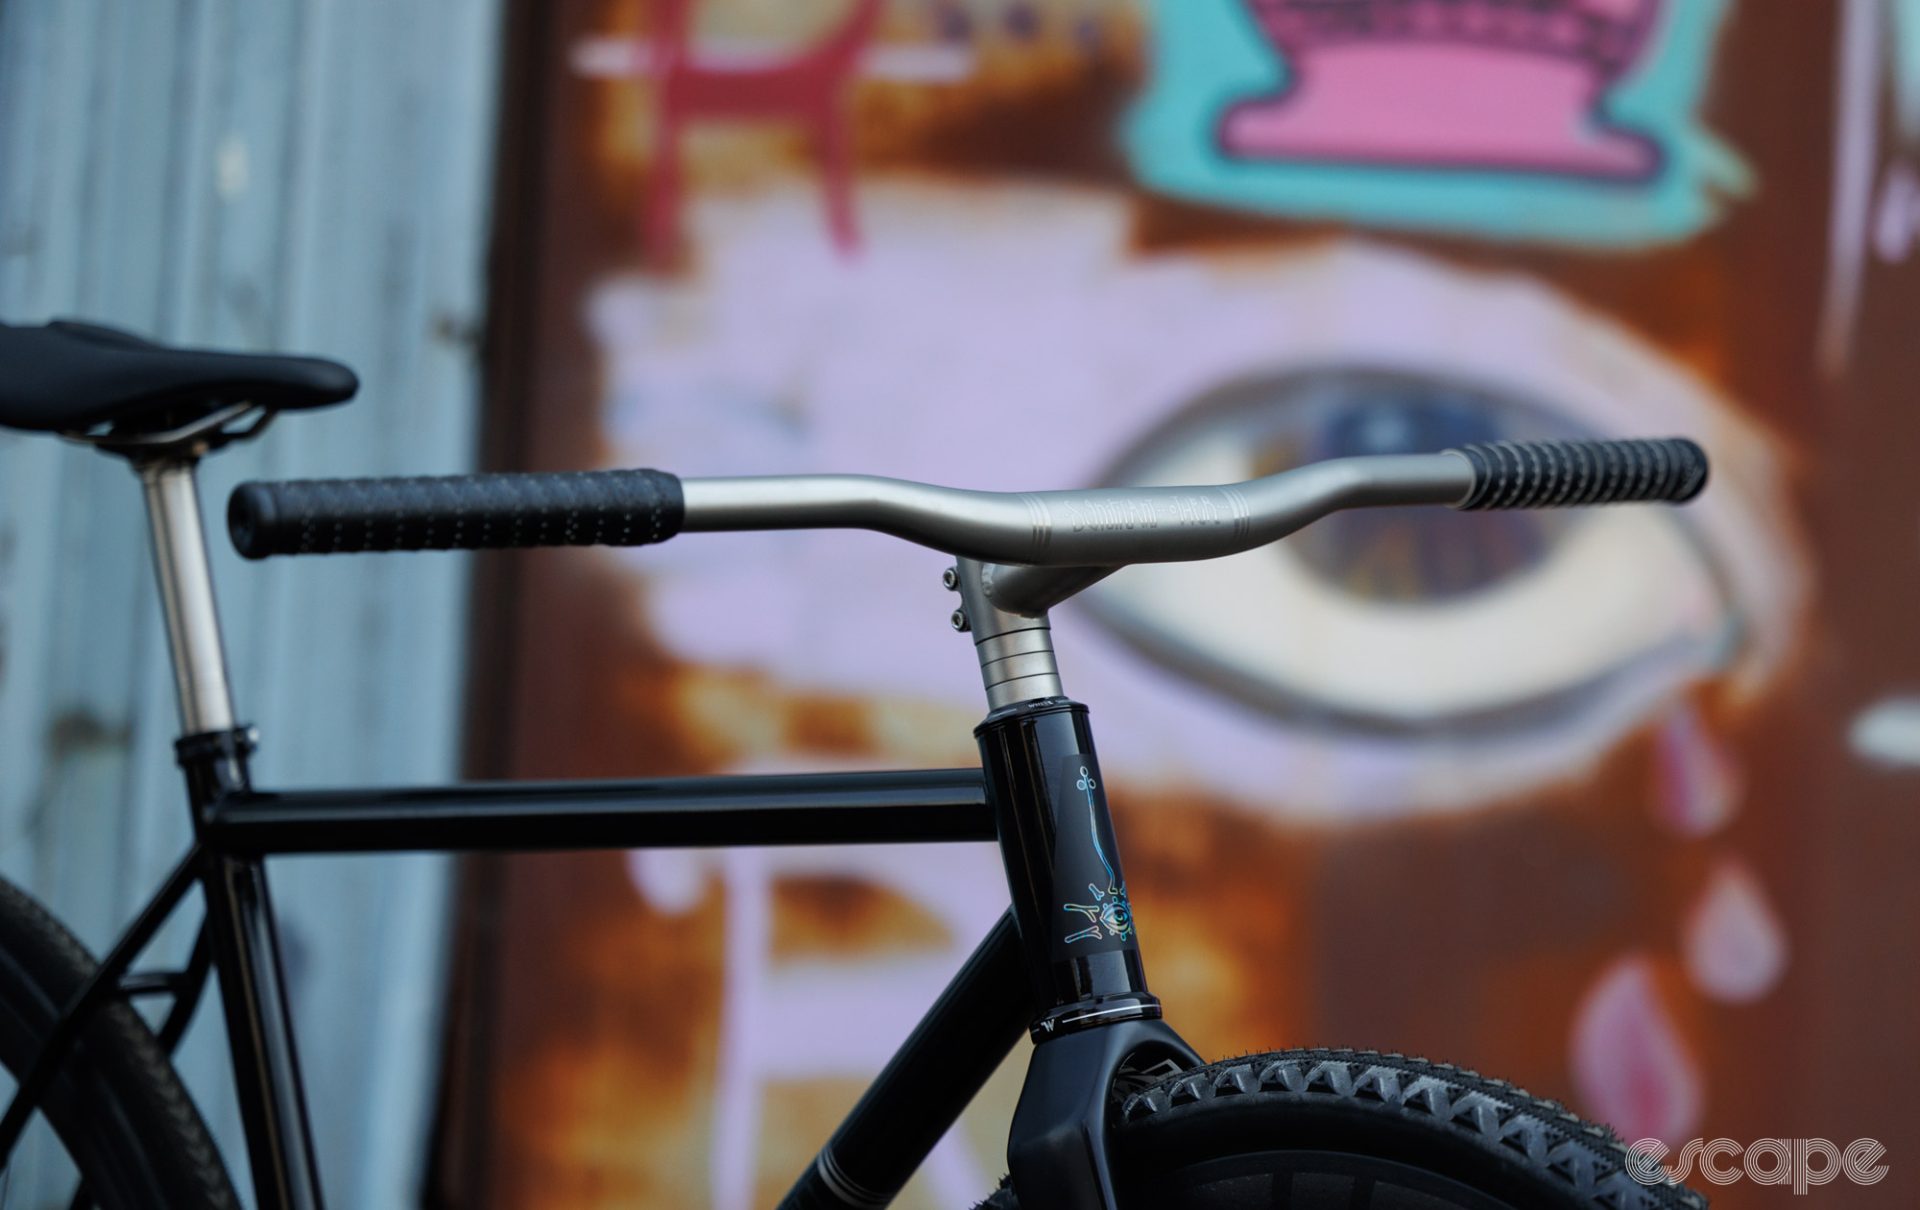 A one-piece welded titanium handlebar and stem made by Significant Other Bikes. 